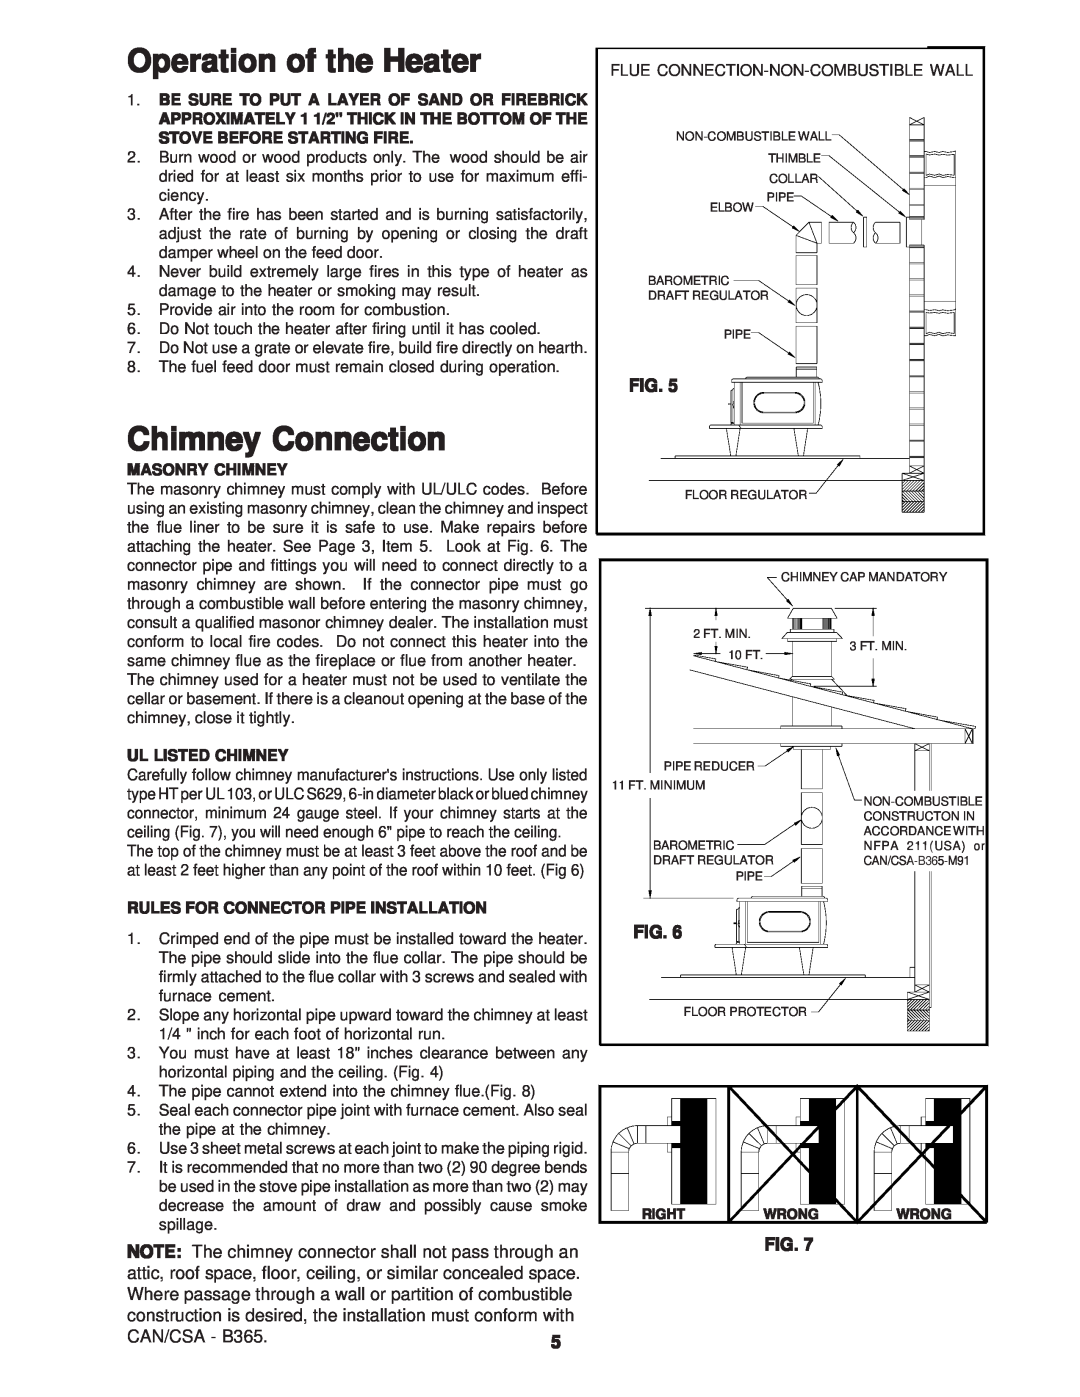 United States Stove C242 Operation of the Heater, Chimney Connection, CAN/CSA - B365.5, Stove Before Starting Fire 